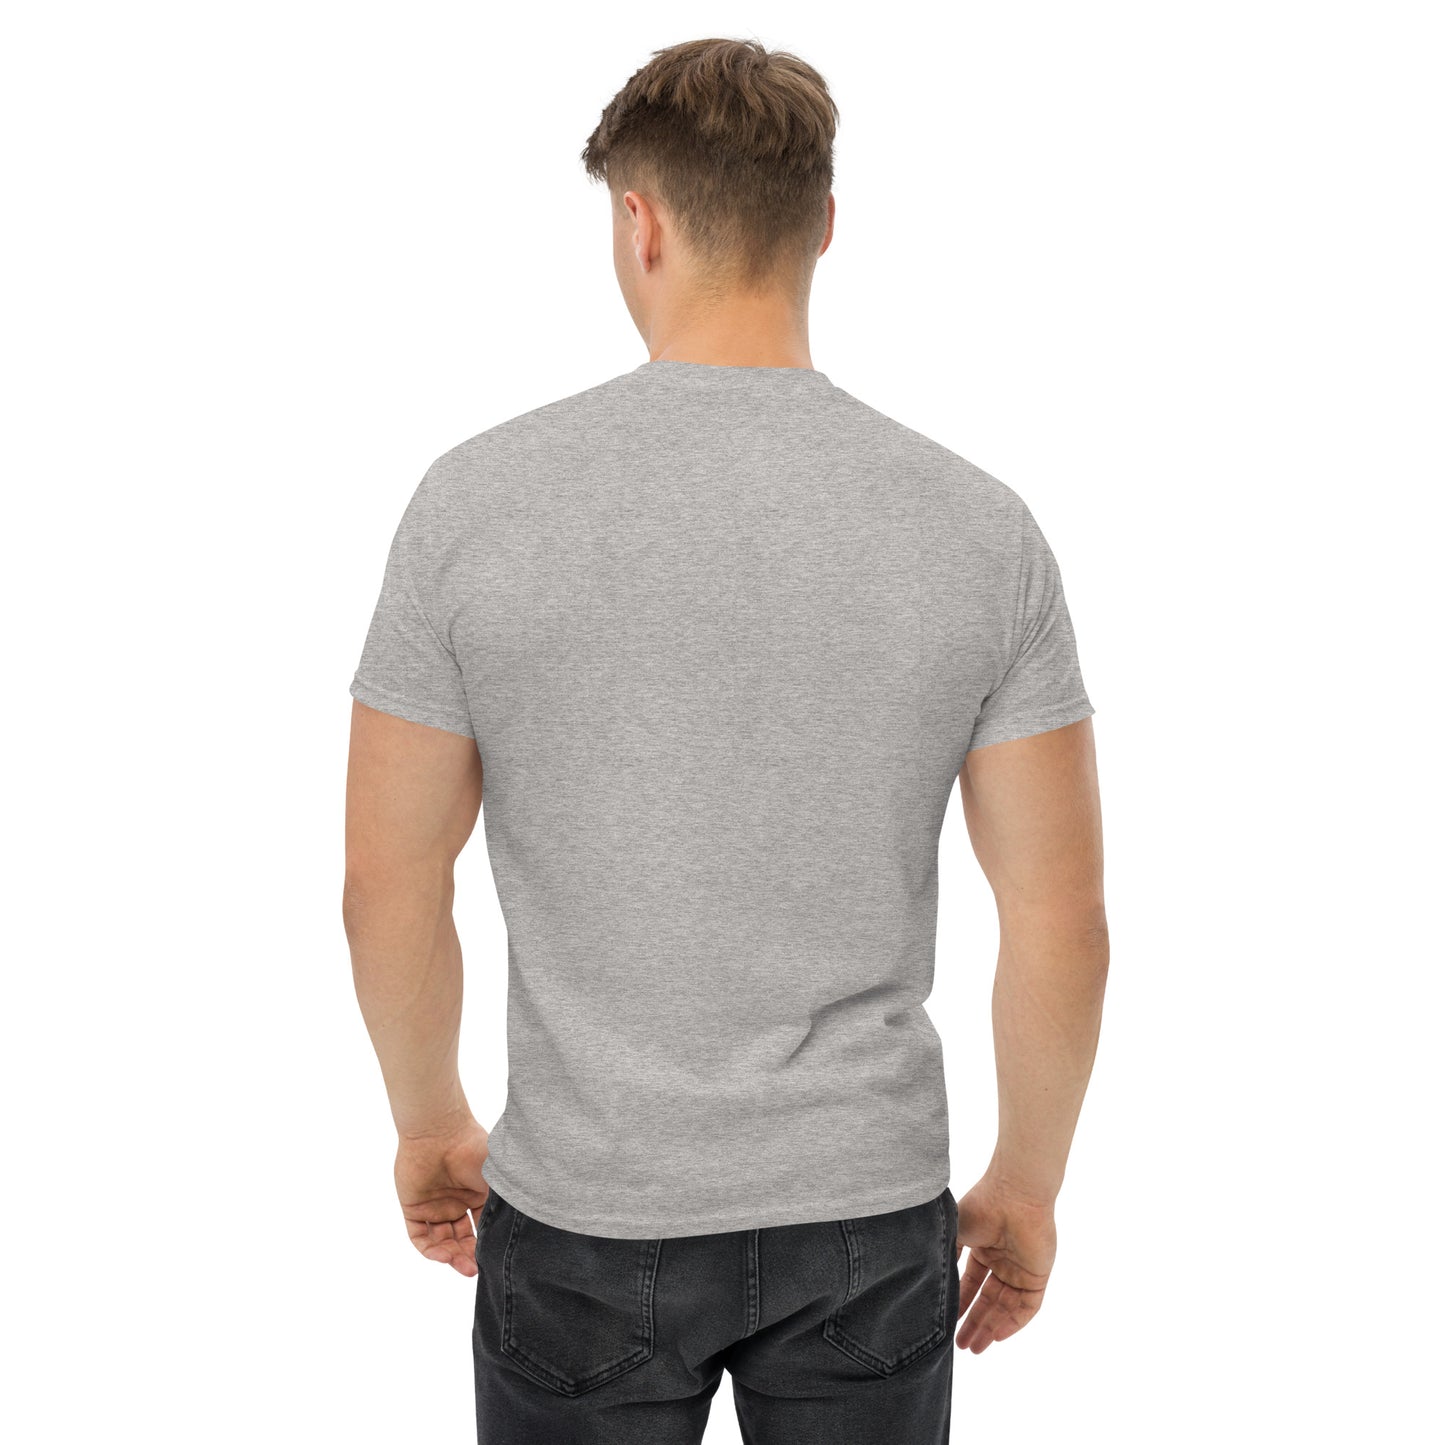 Simplicity, Men's classic T-Shirt by Our BoatyVerse